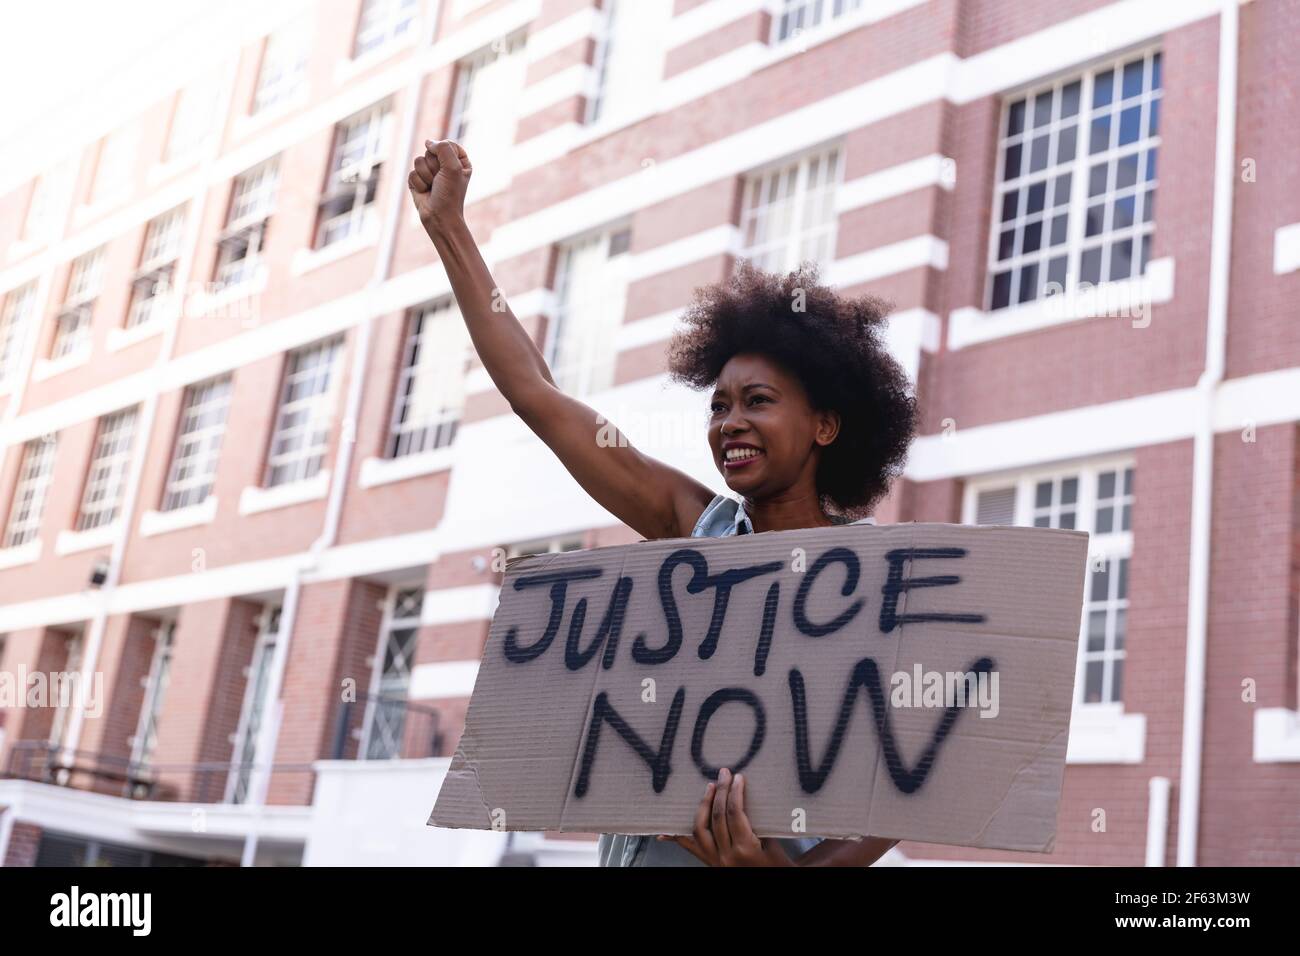 African american female protester on march holding a homemade protest sign raising fist and smiling Stock Photo